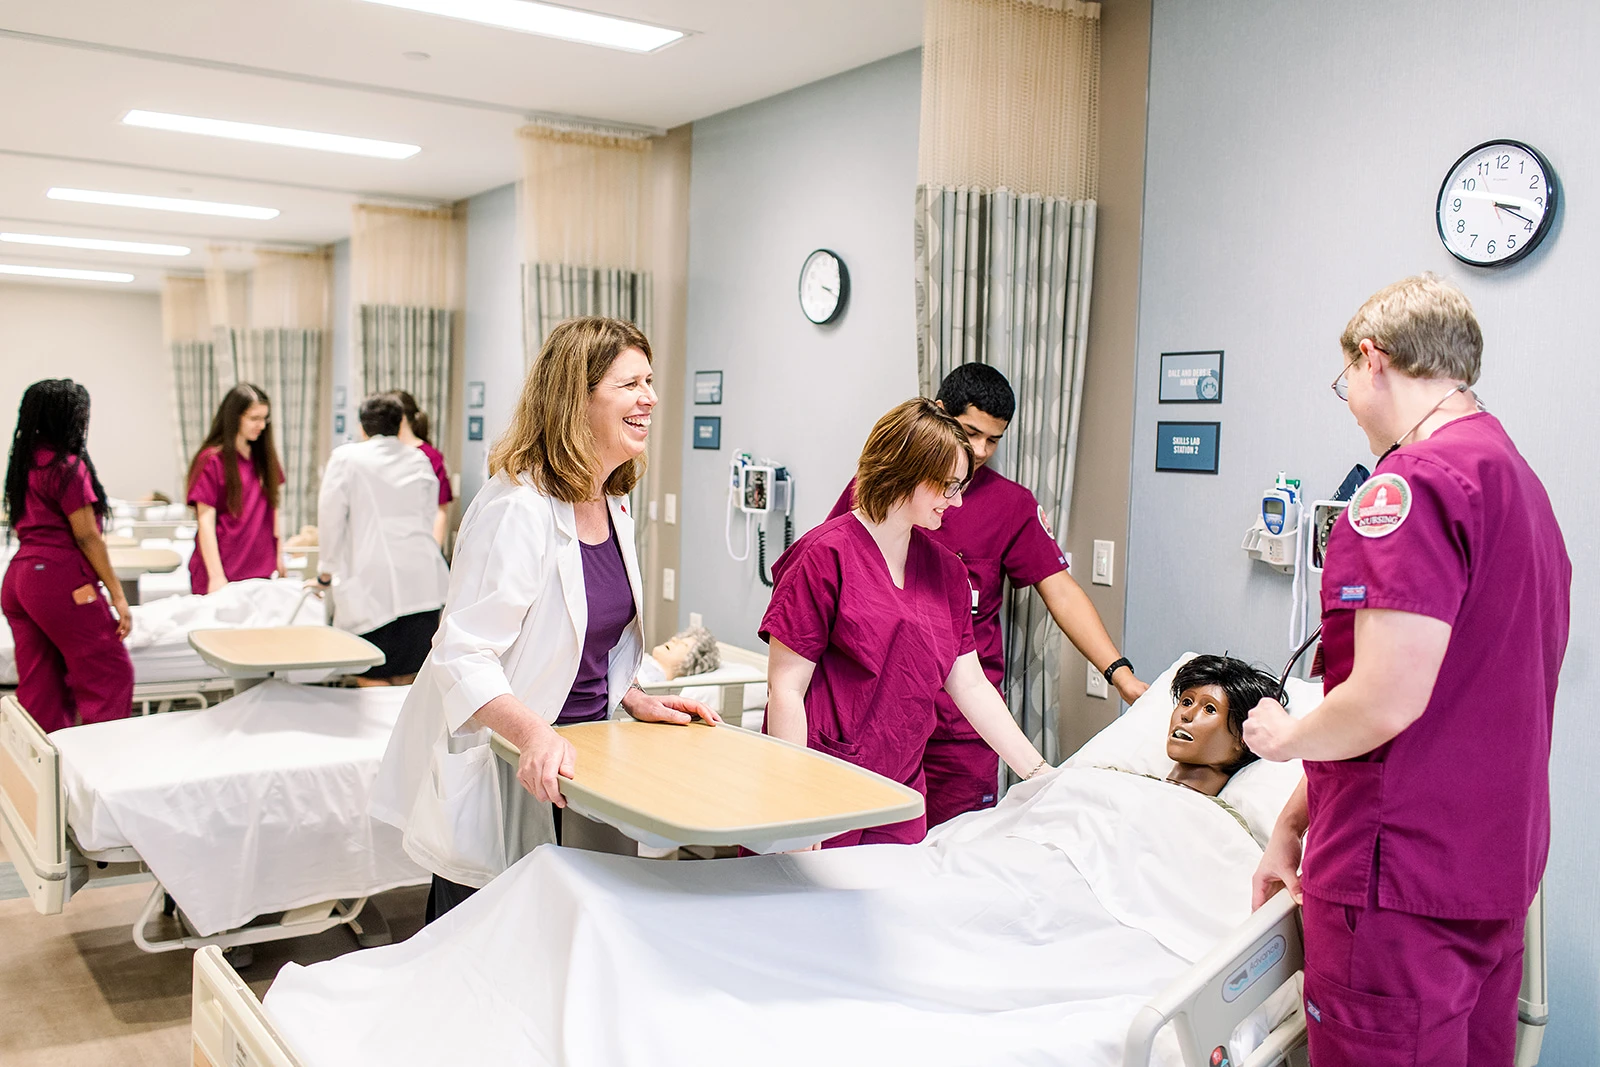 Three nursing students dressed in maroon scrubs look down at their patient and their professor watches over and smiles